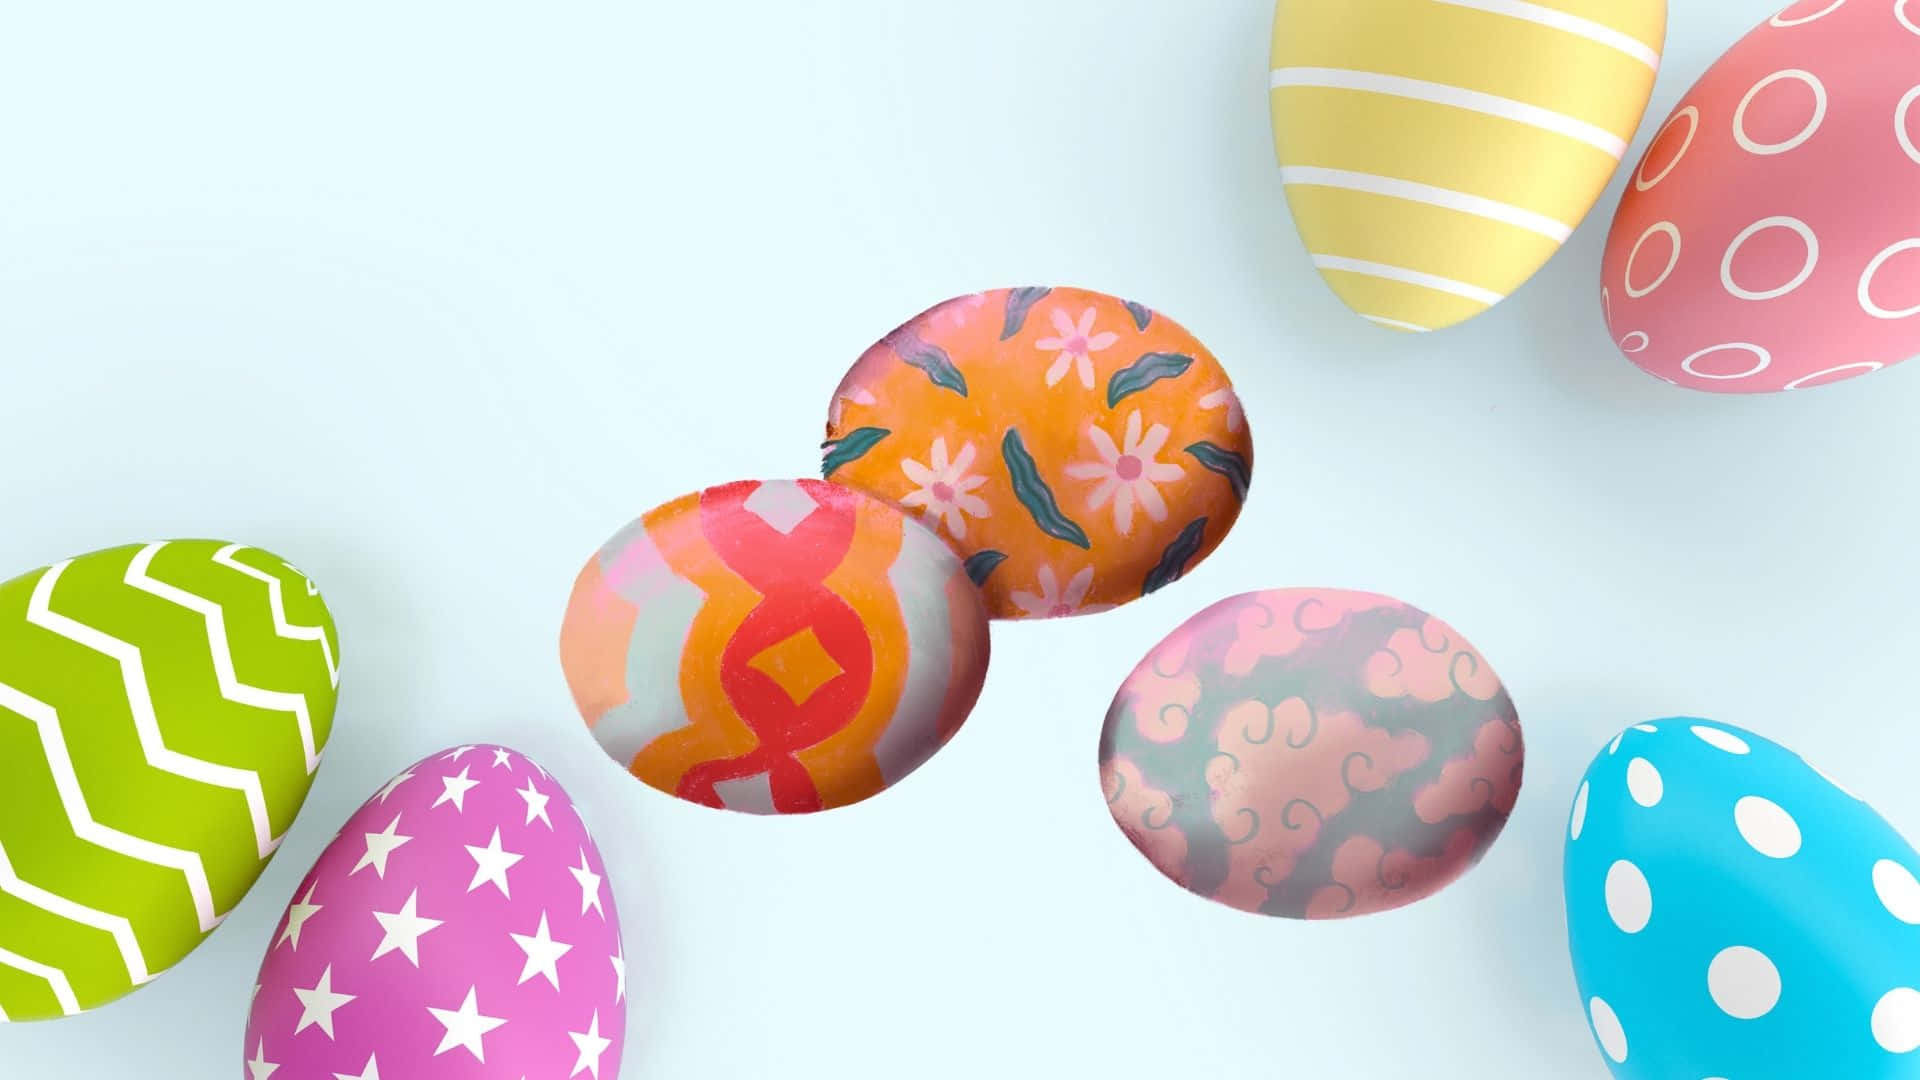 "Pastel-colored Easter eggs bring a bright and cheerful spirit to the season!" Wallpaper